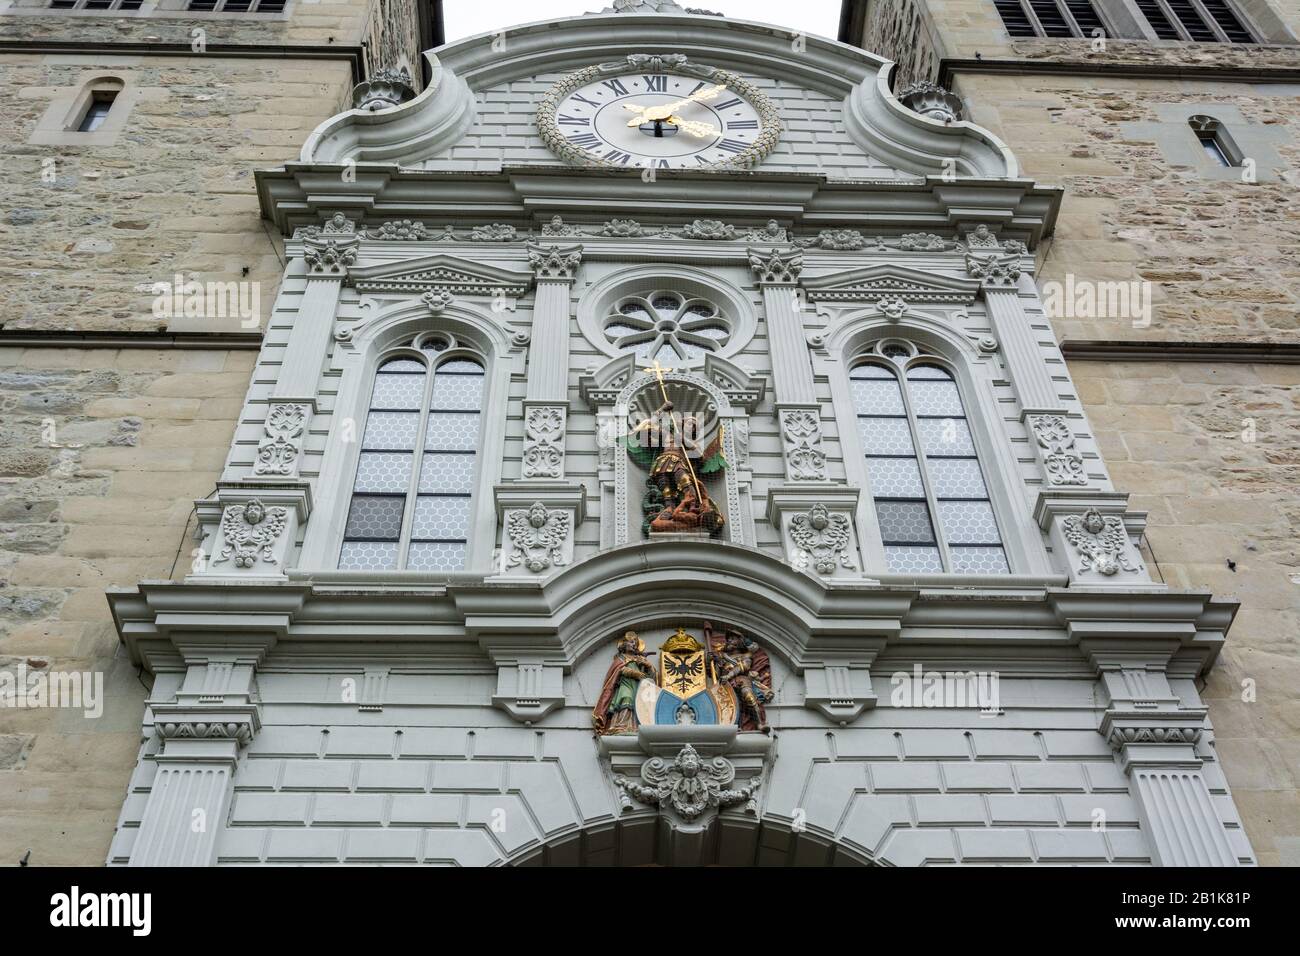 Lucerne, Switzerland - June 26, 2016. Facade of Church of St. Leodegar (Hofkirche St. Leodegar) in Lucerne, Switzerland, with religious statues and ch Stock Photo